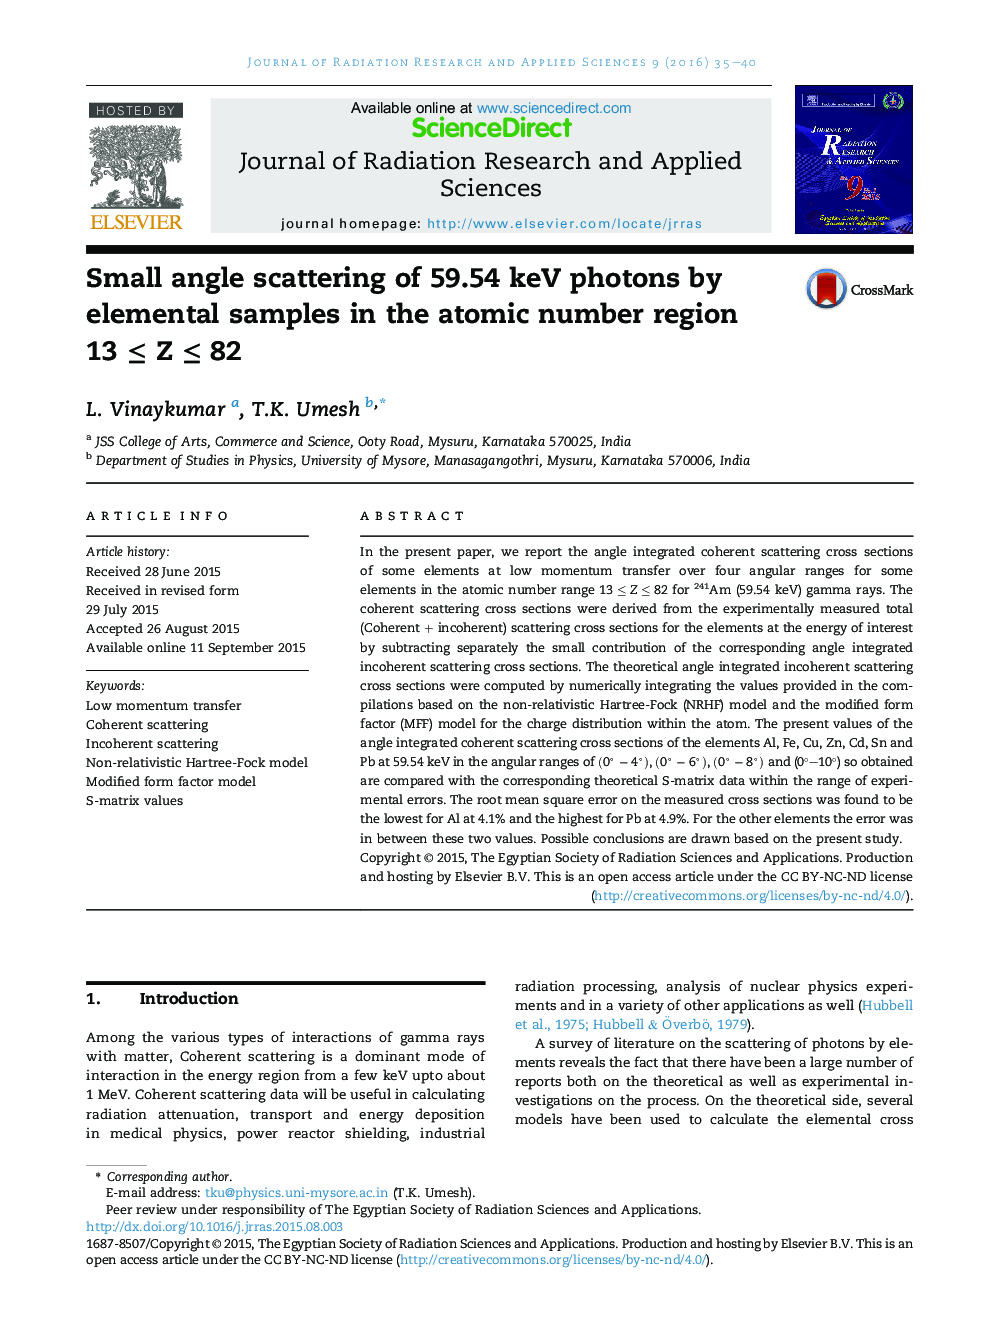 Small angle scattering of 59.54 keV photons by elemental samples in the atomic number region 13 ≤ Z ≤ 82 